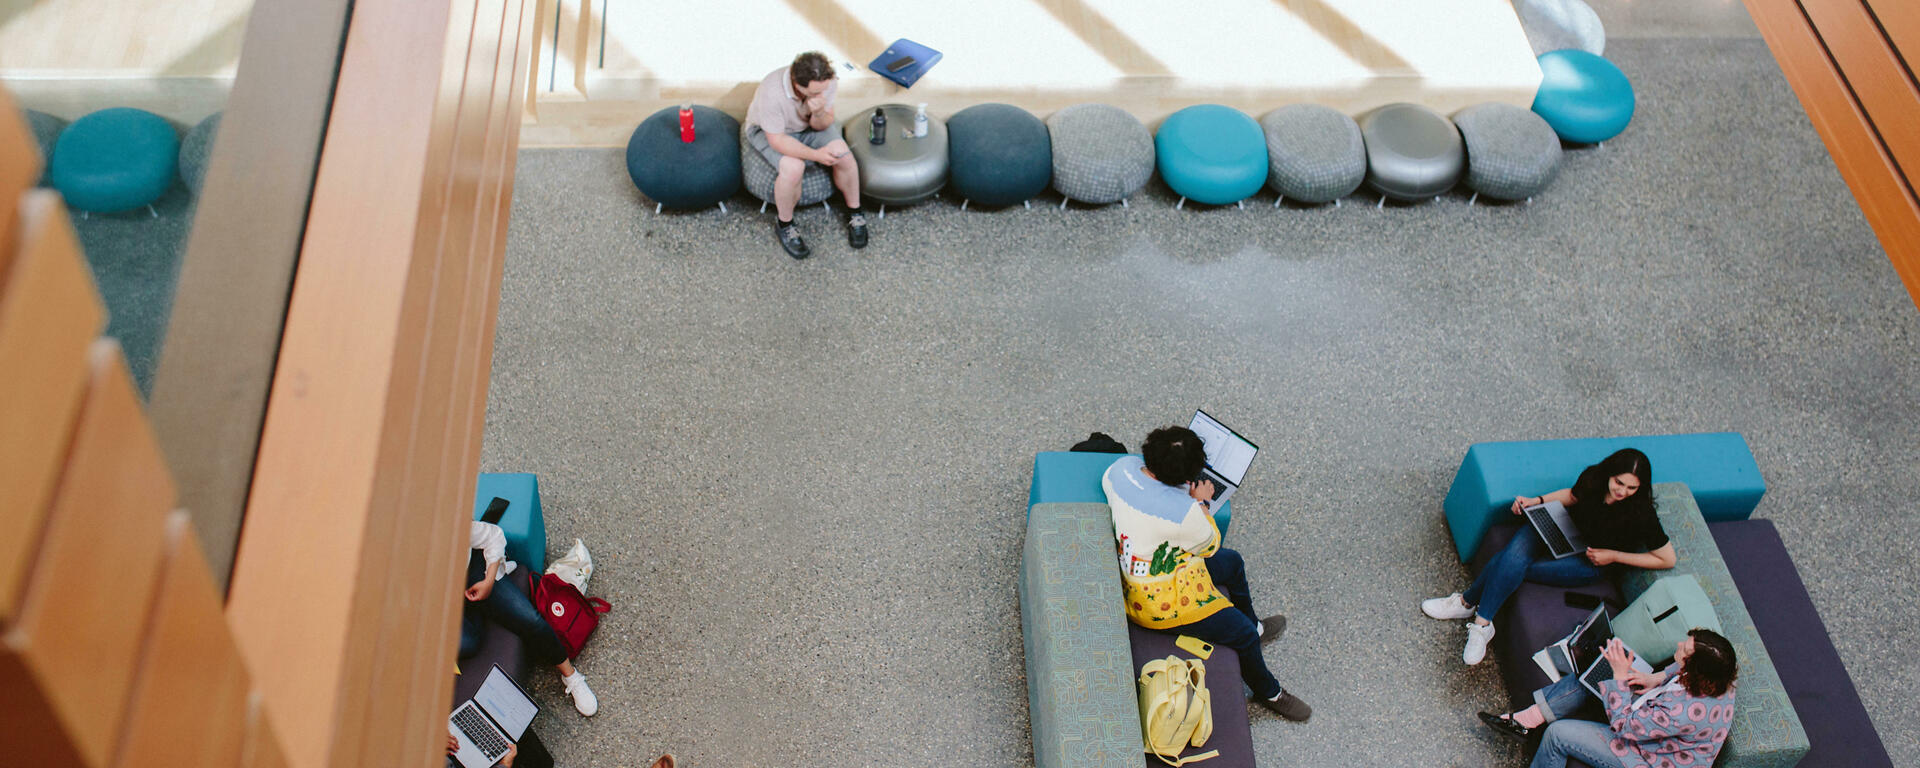 Students study in a sunny Taylor Institute atrium, on brightly coloured couches and poufs.